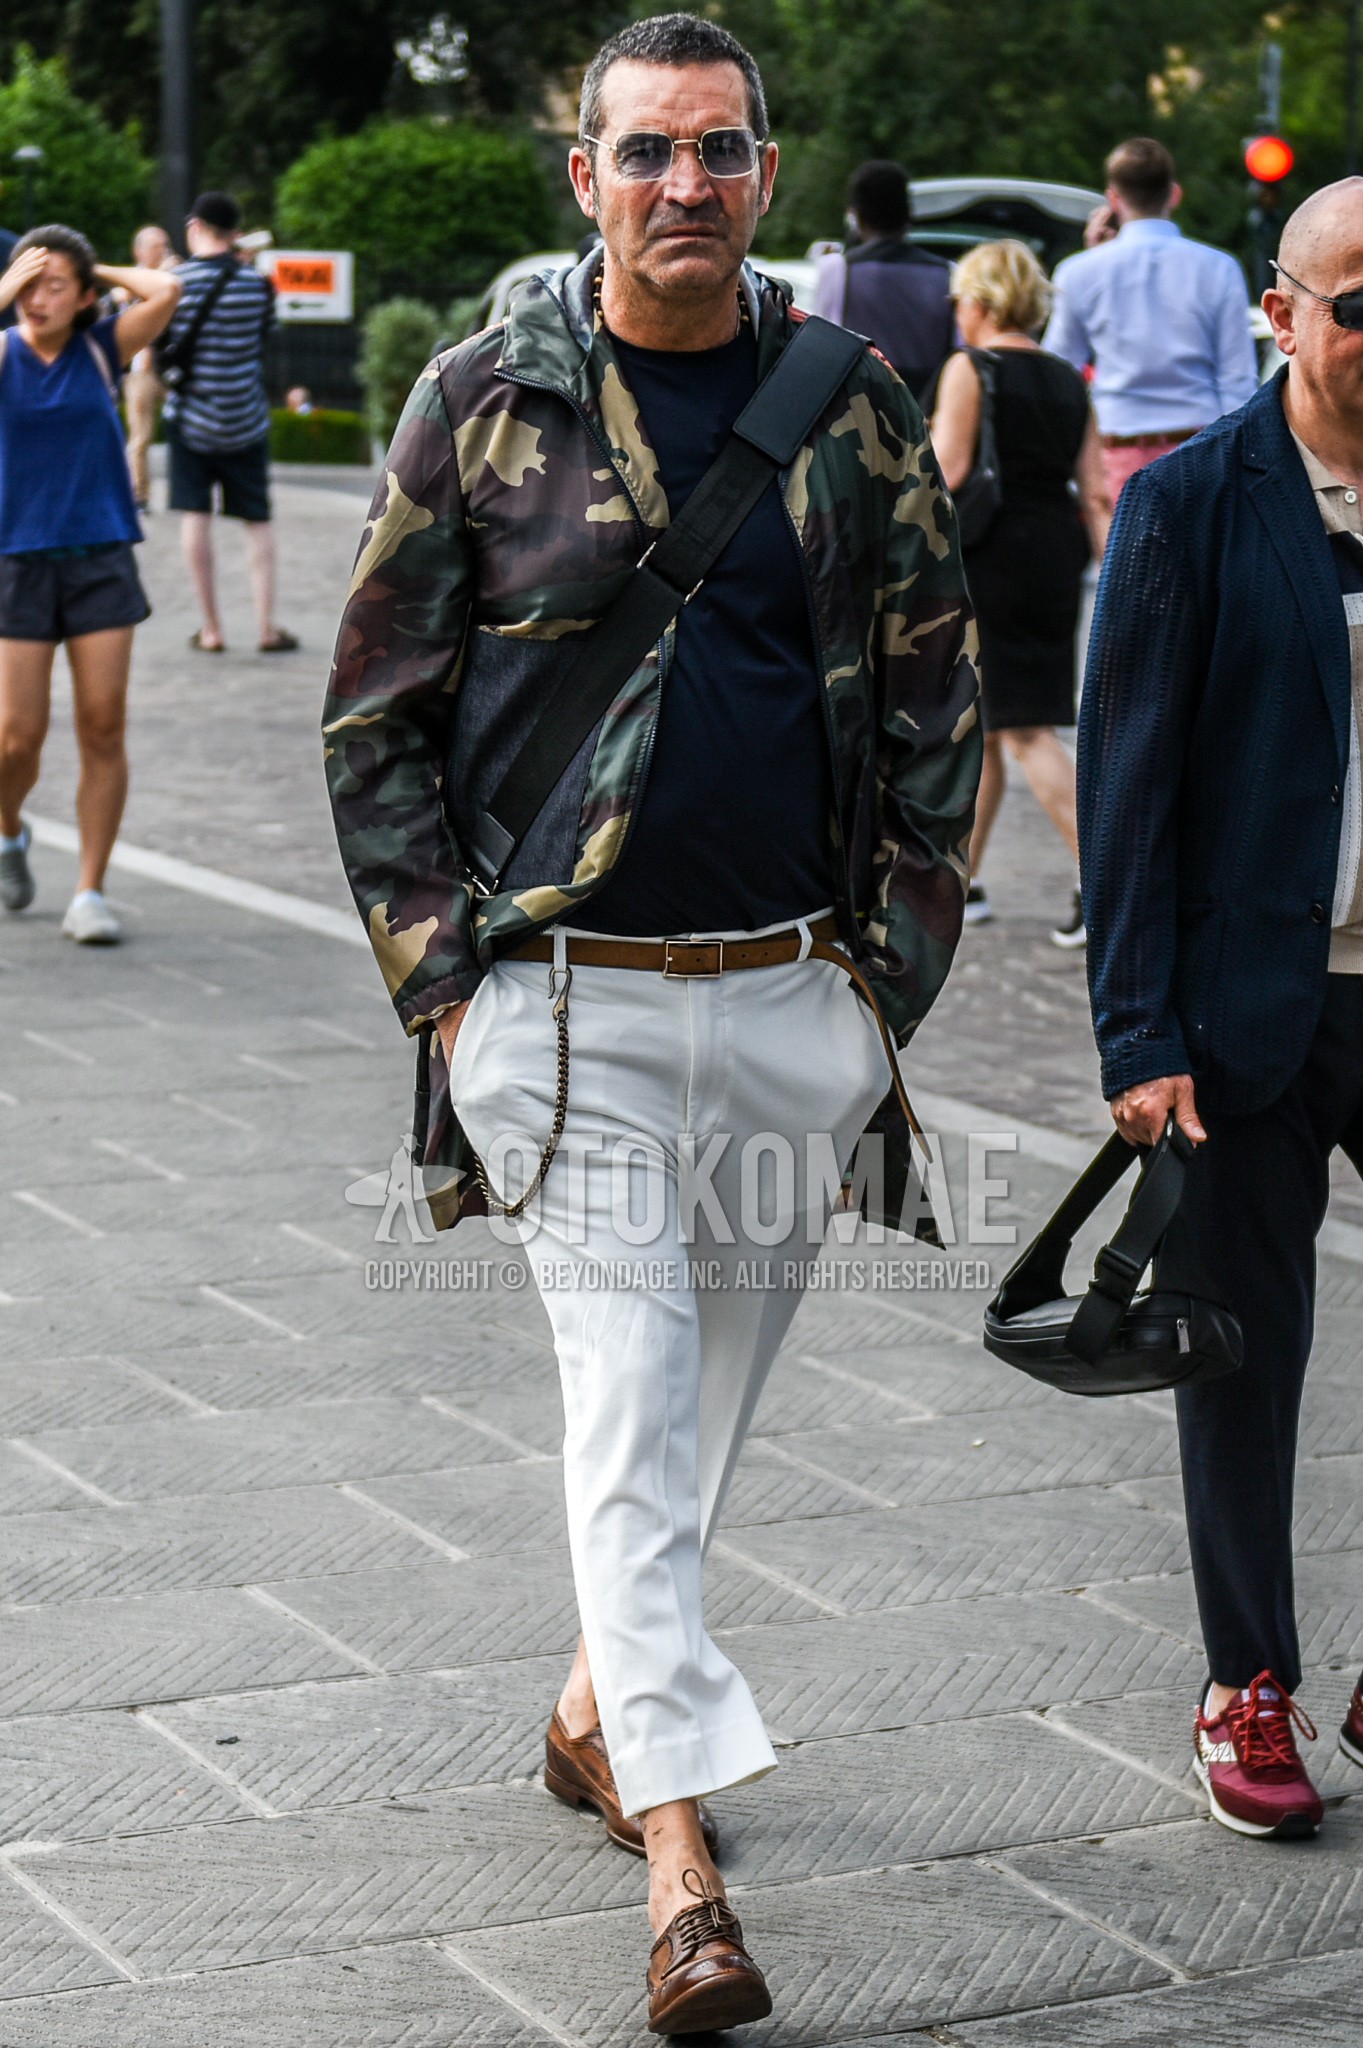 Men's spring autumn outfit with silver plain sunglasses, olive green camouflage hooded coat, navy plain t-shirt, brown plain leather belt, white plain cotton pants, brown wing-tip shoes leather shoes.